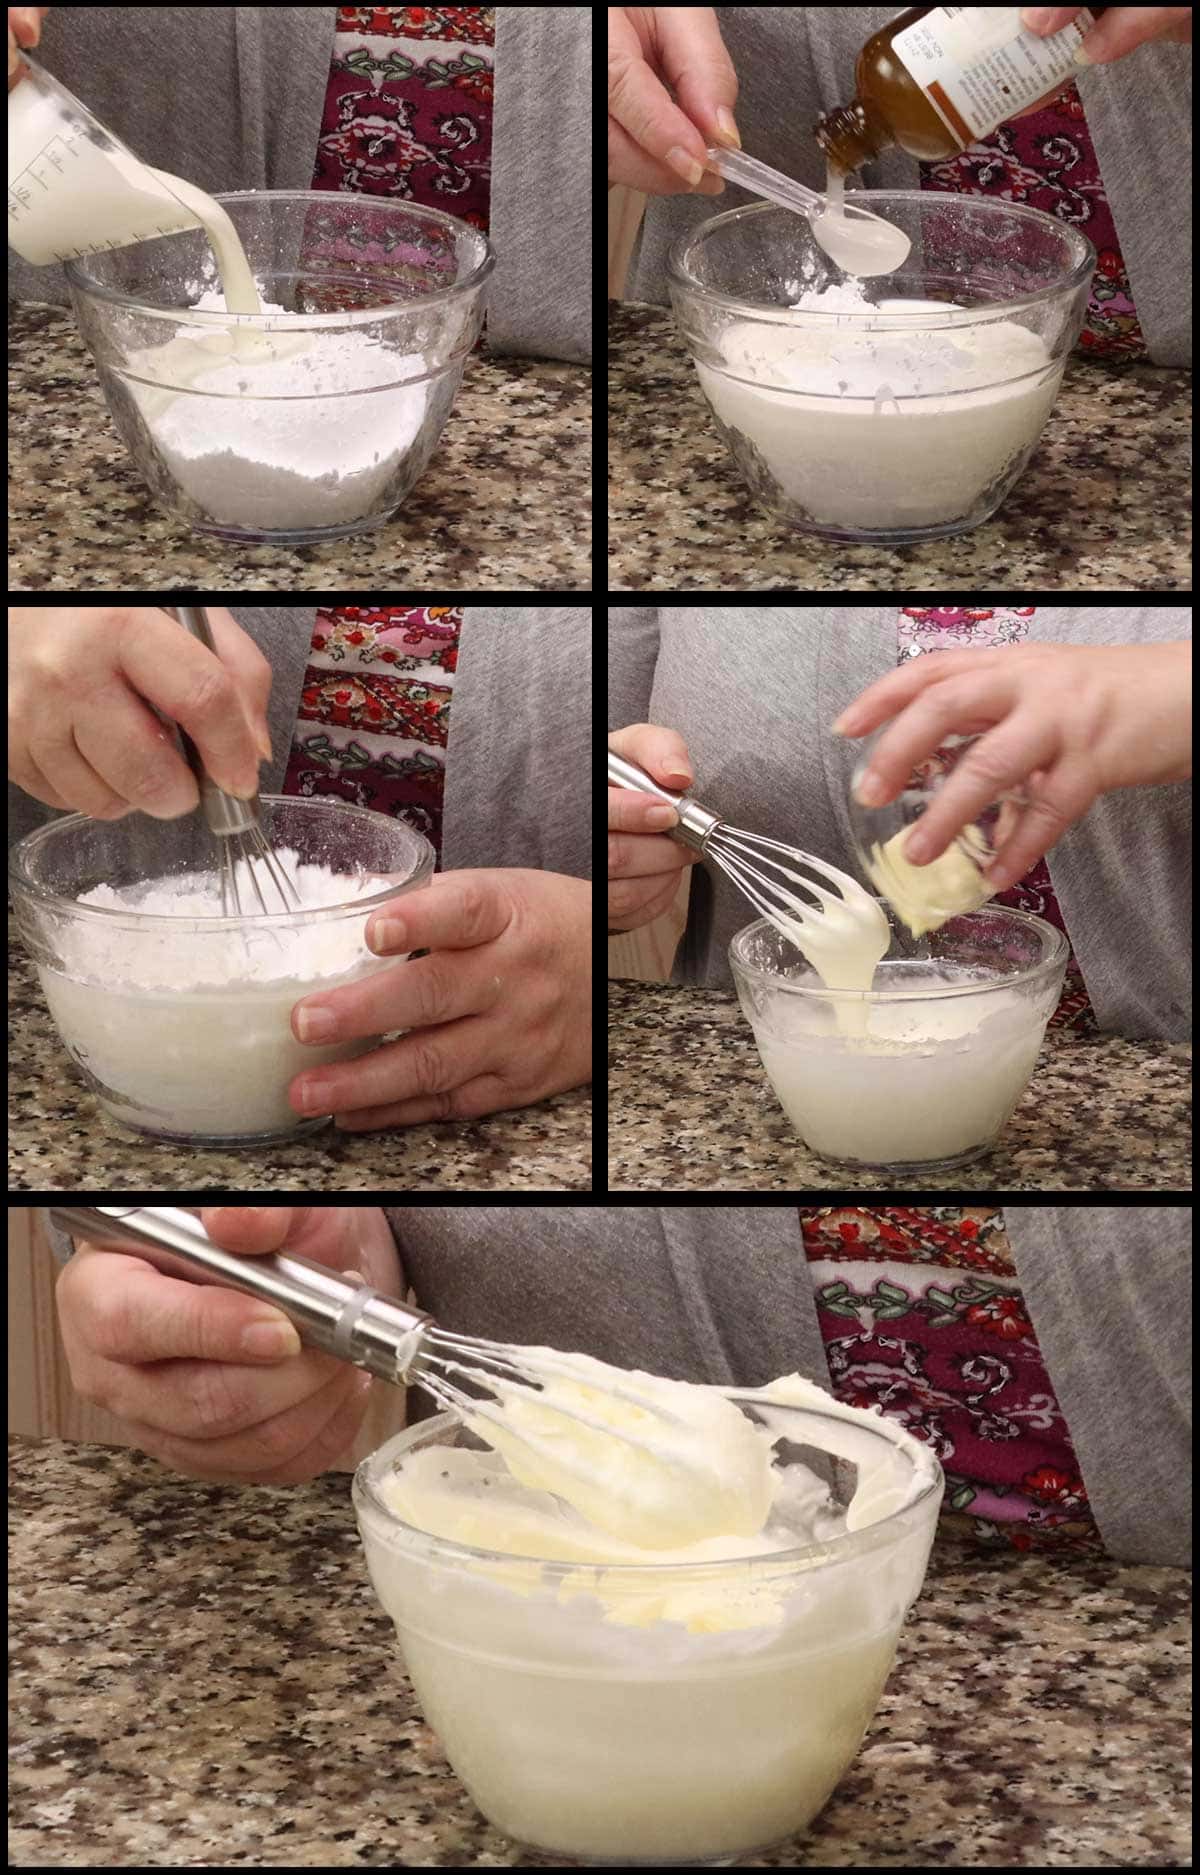 making the almond icing